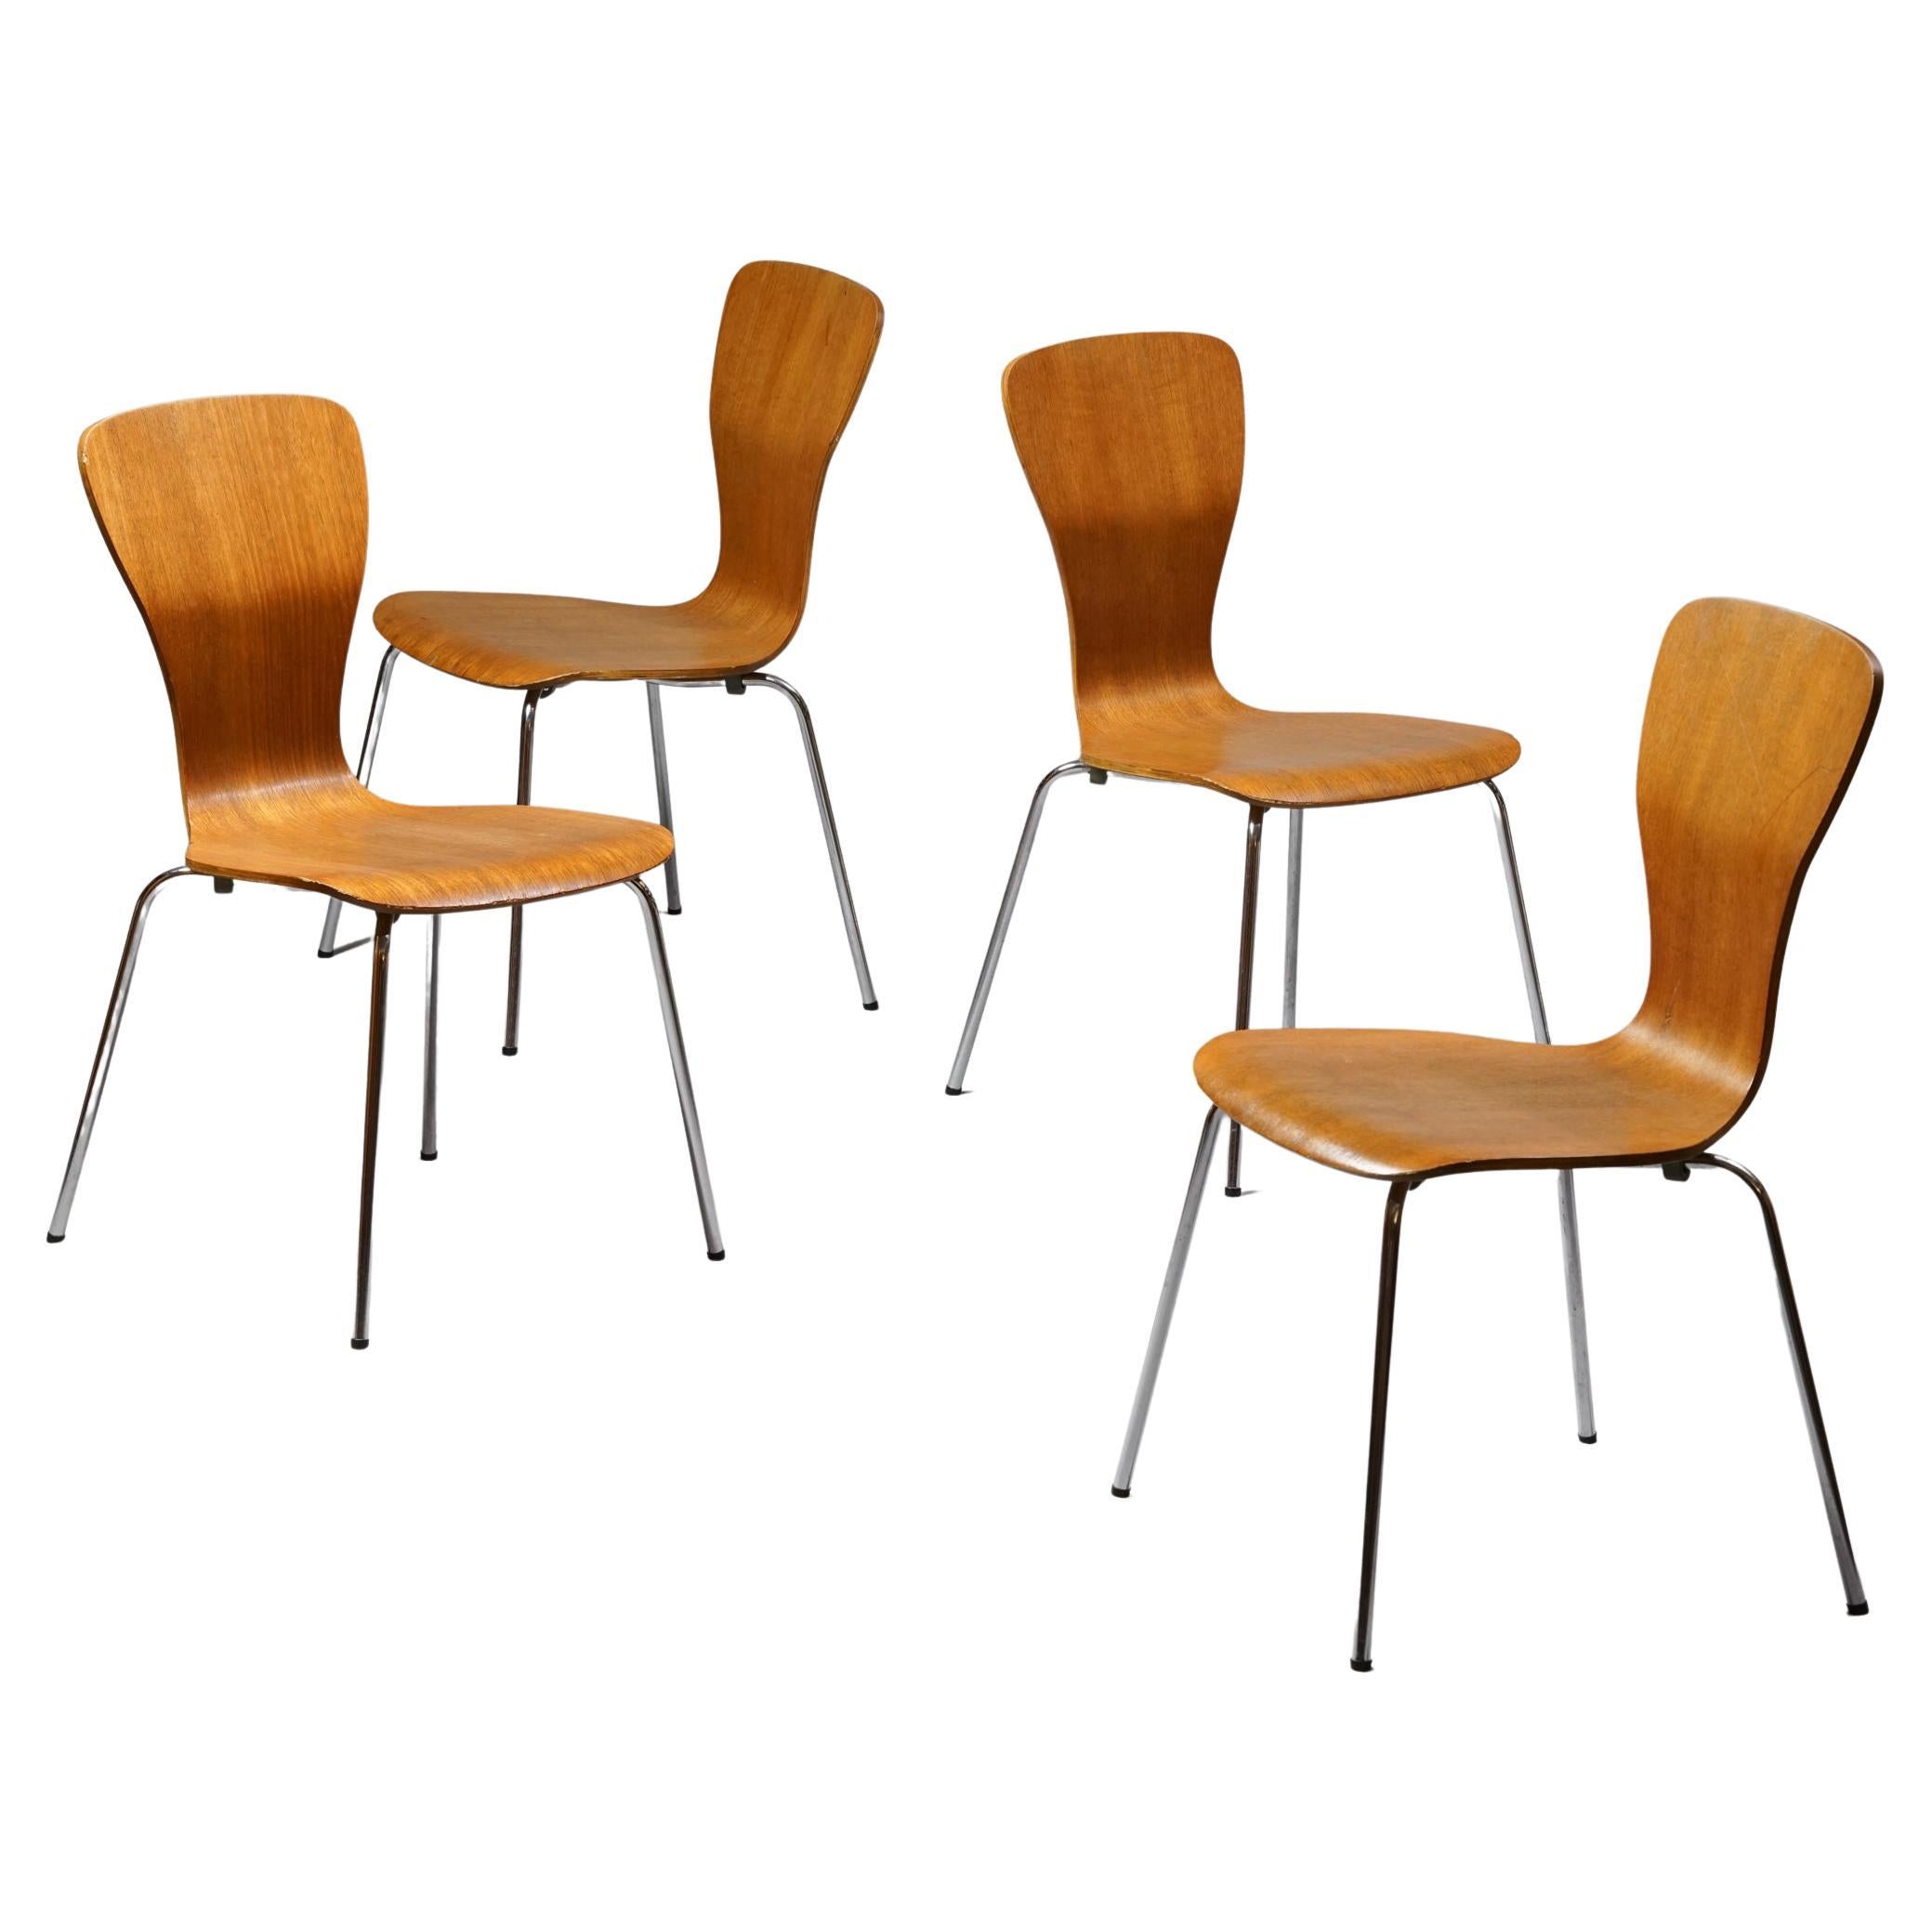 Set of Four Stackable Model Nikke Chairs by Tapio Wirkkala for Asko, 1950s